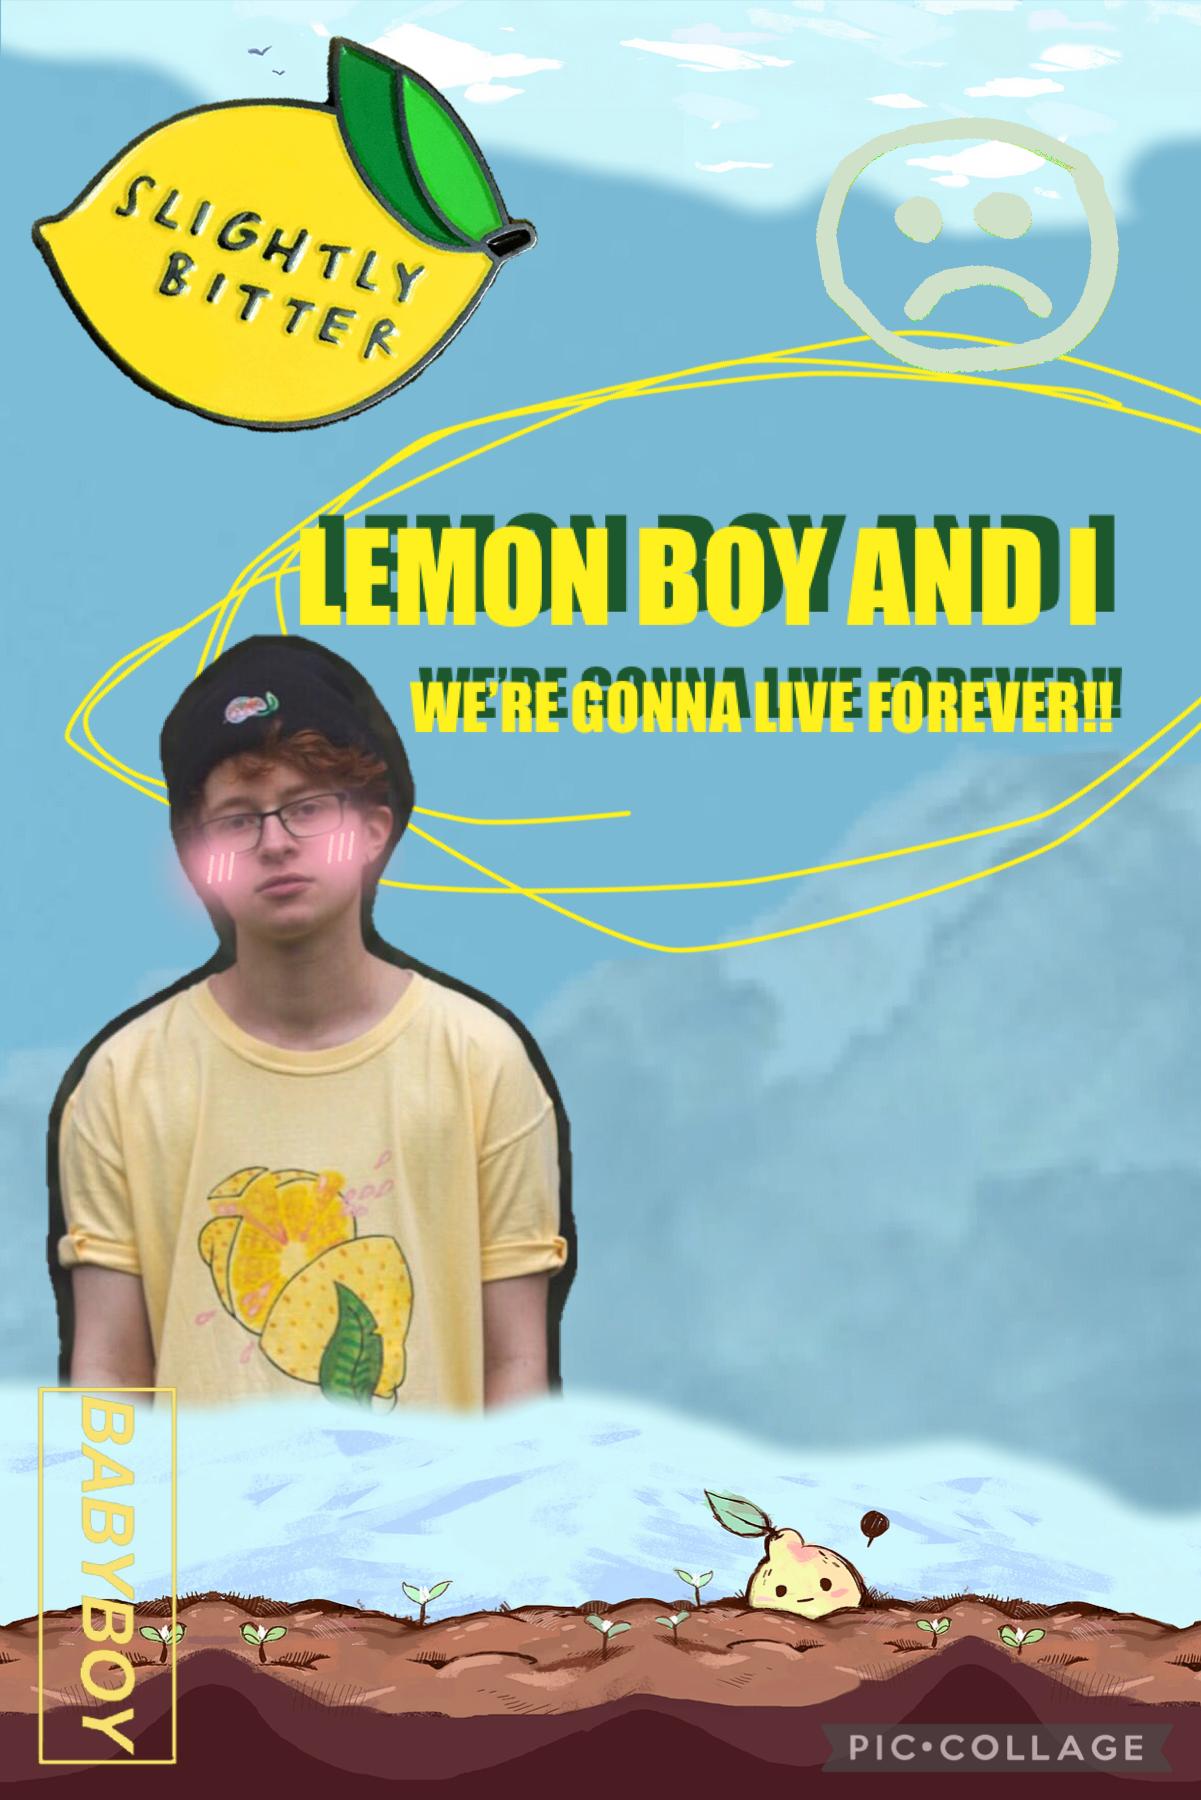 🍋 TAP FOR A LEMON 🍋
🍋 no lemons 🍋
🍋 sorry i lied 🍋
🍋 ANYWAY cavetown collage bc i’m bored 🍋
🍋 not my best lol 🍋
🍋 sorry i’ve been inactive today bc i’m busy dealing with life… yay (they said sarcastically) 🍋